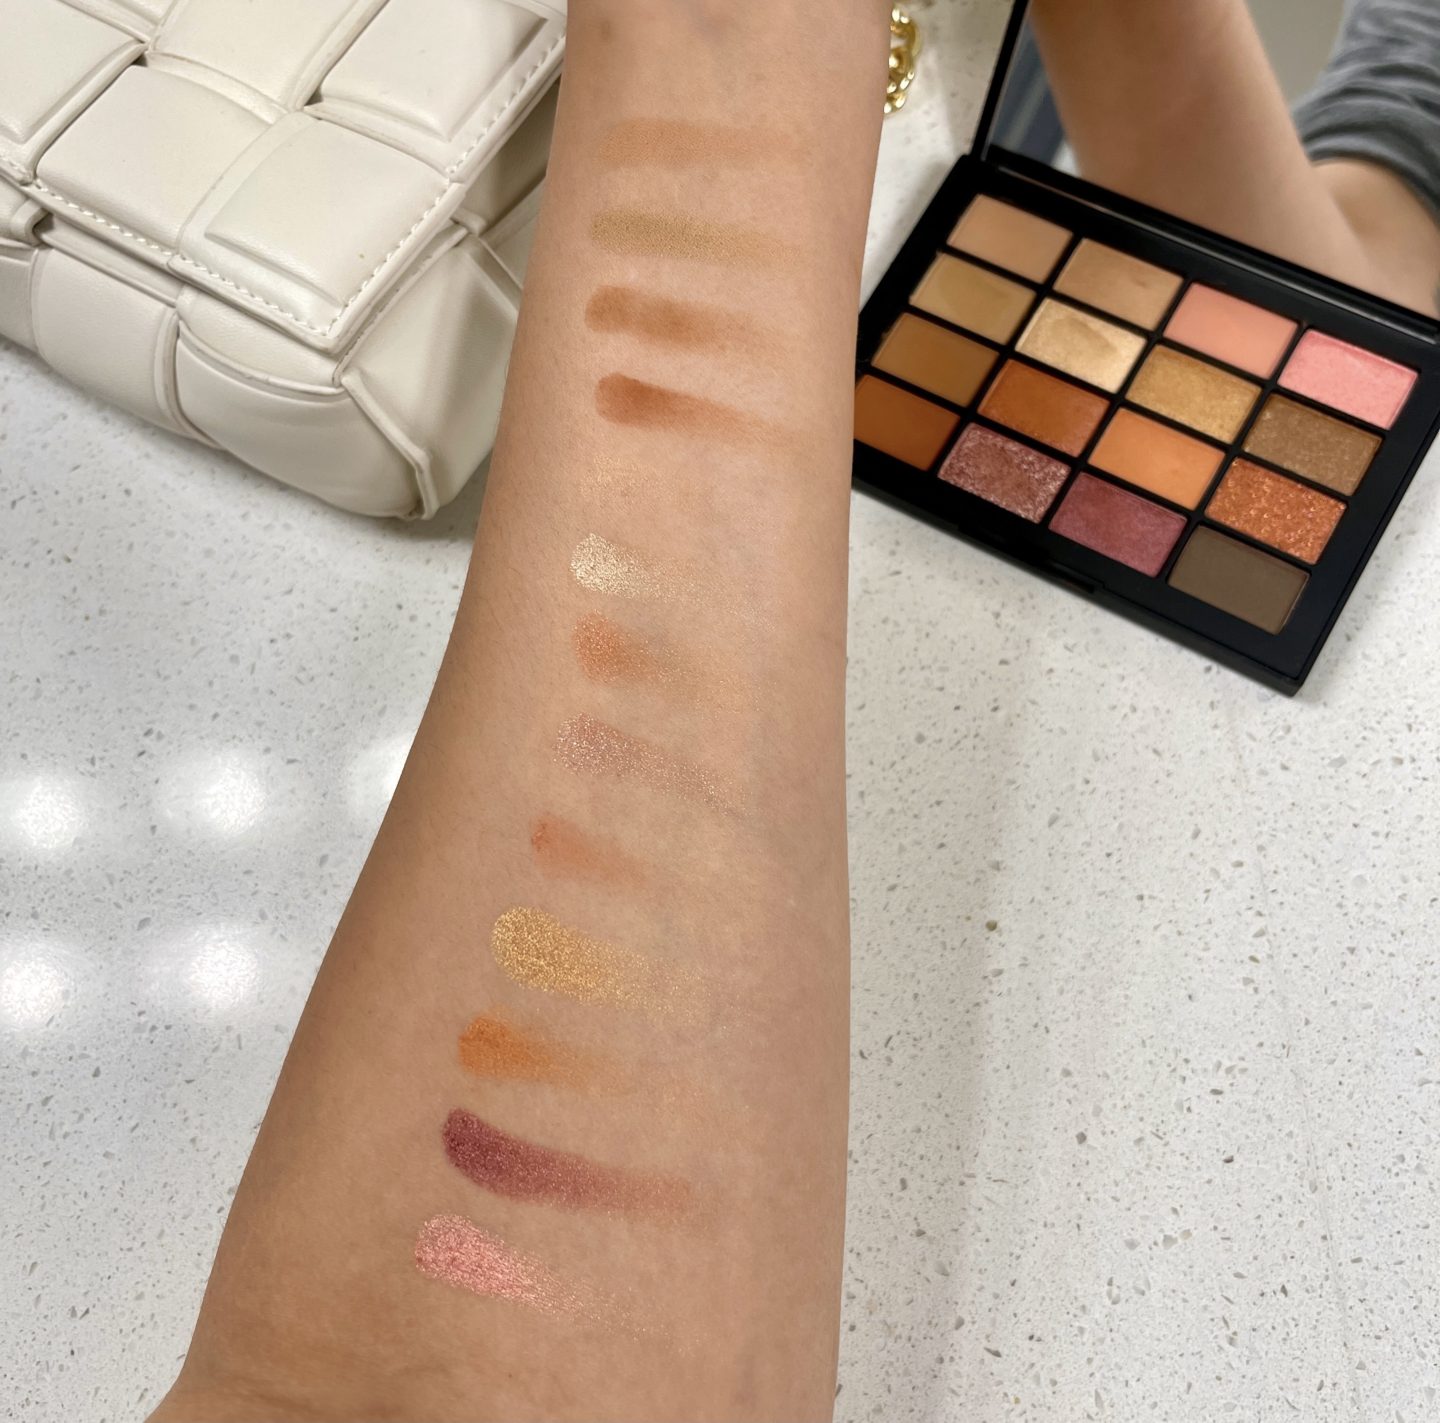 NARS Summer Unrated eyeshadow palette swatches